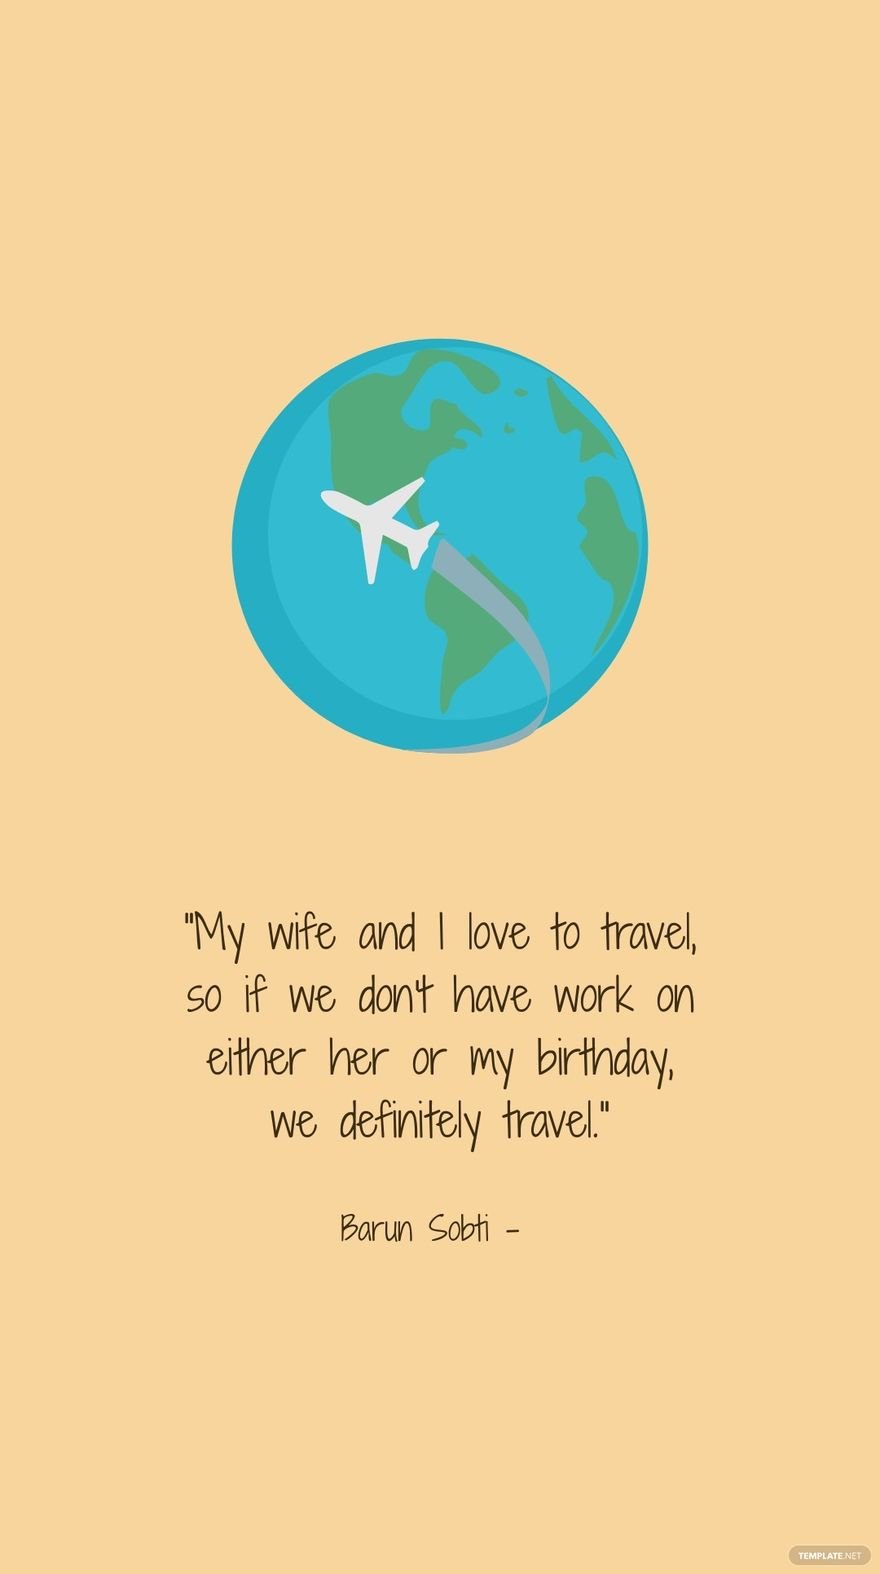 Barun Sobti - My wife and I love to travel, so if we don't have work on either her or my birthday, we definitely travel.